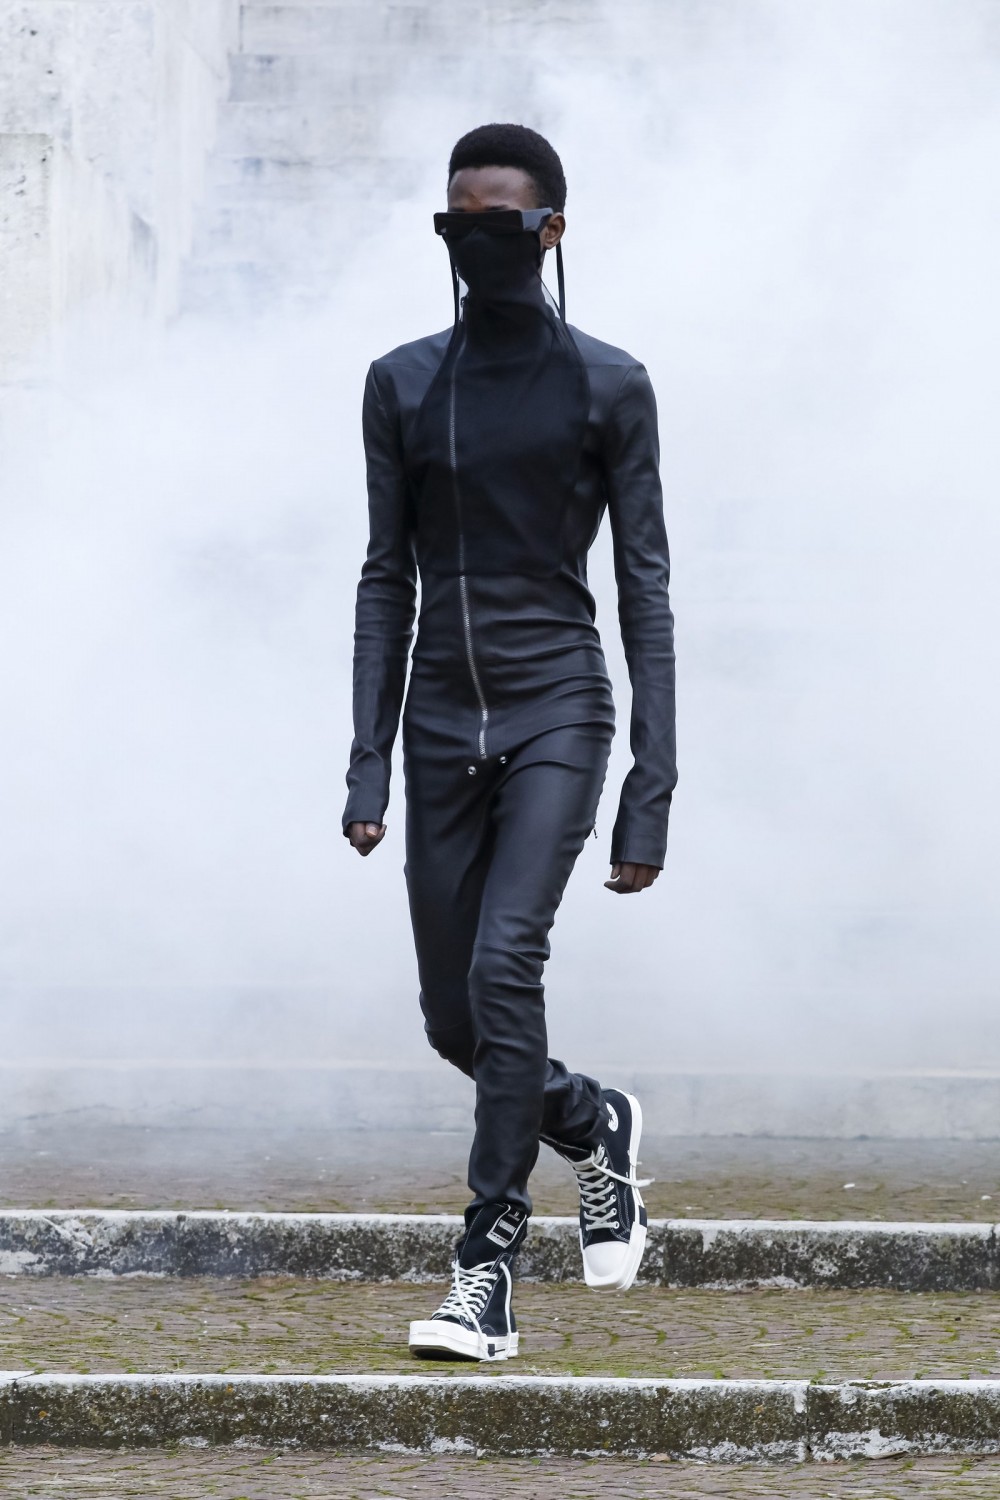 No Normal Clothes The Mens Fall 2021 Collections Prize Ingenuity and Independence